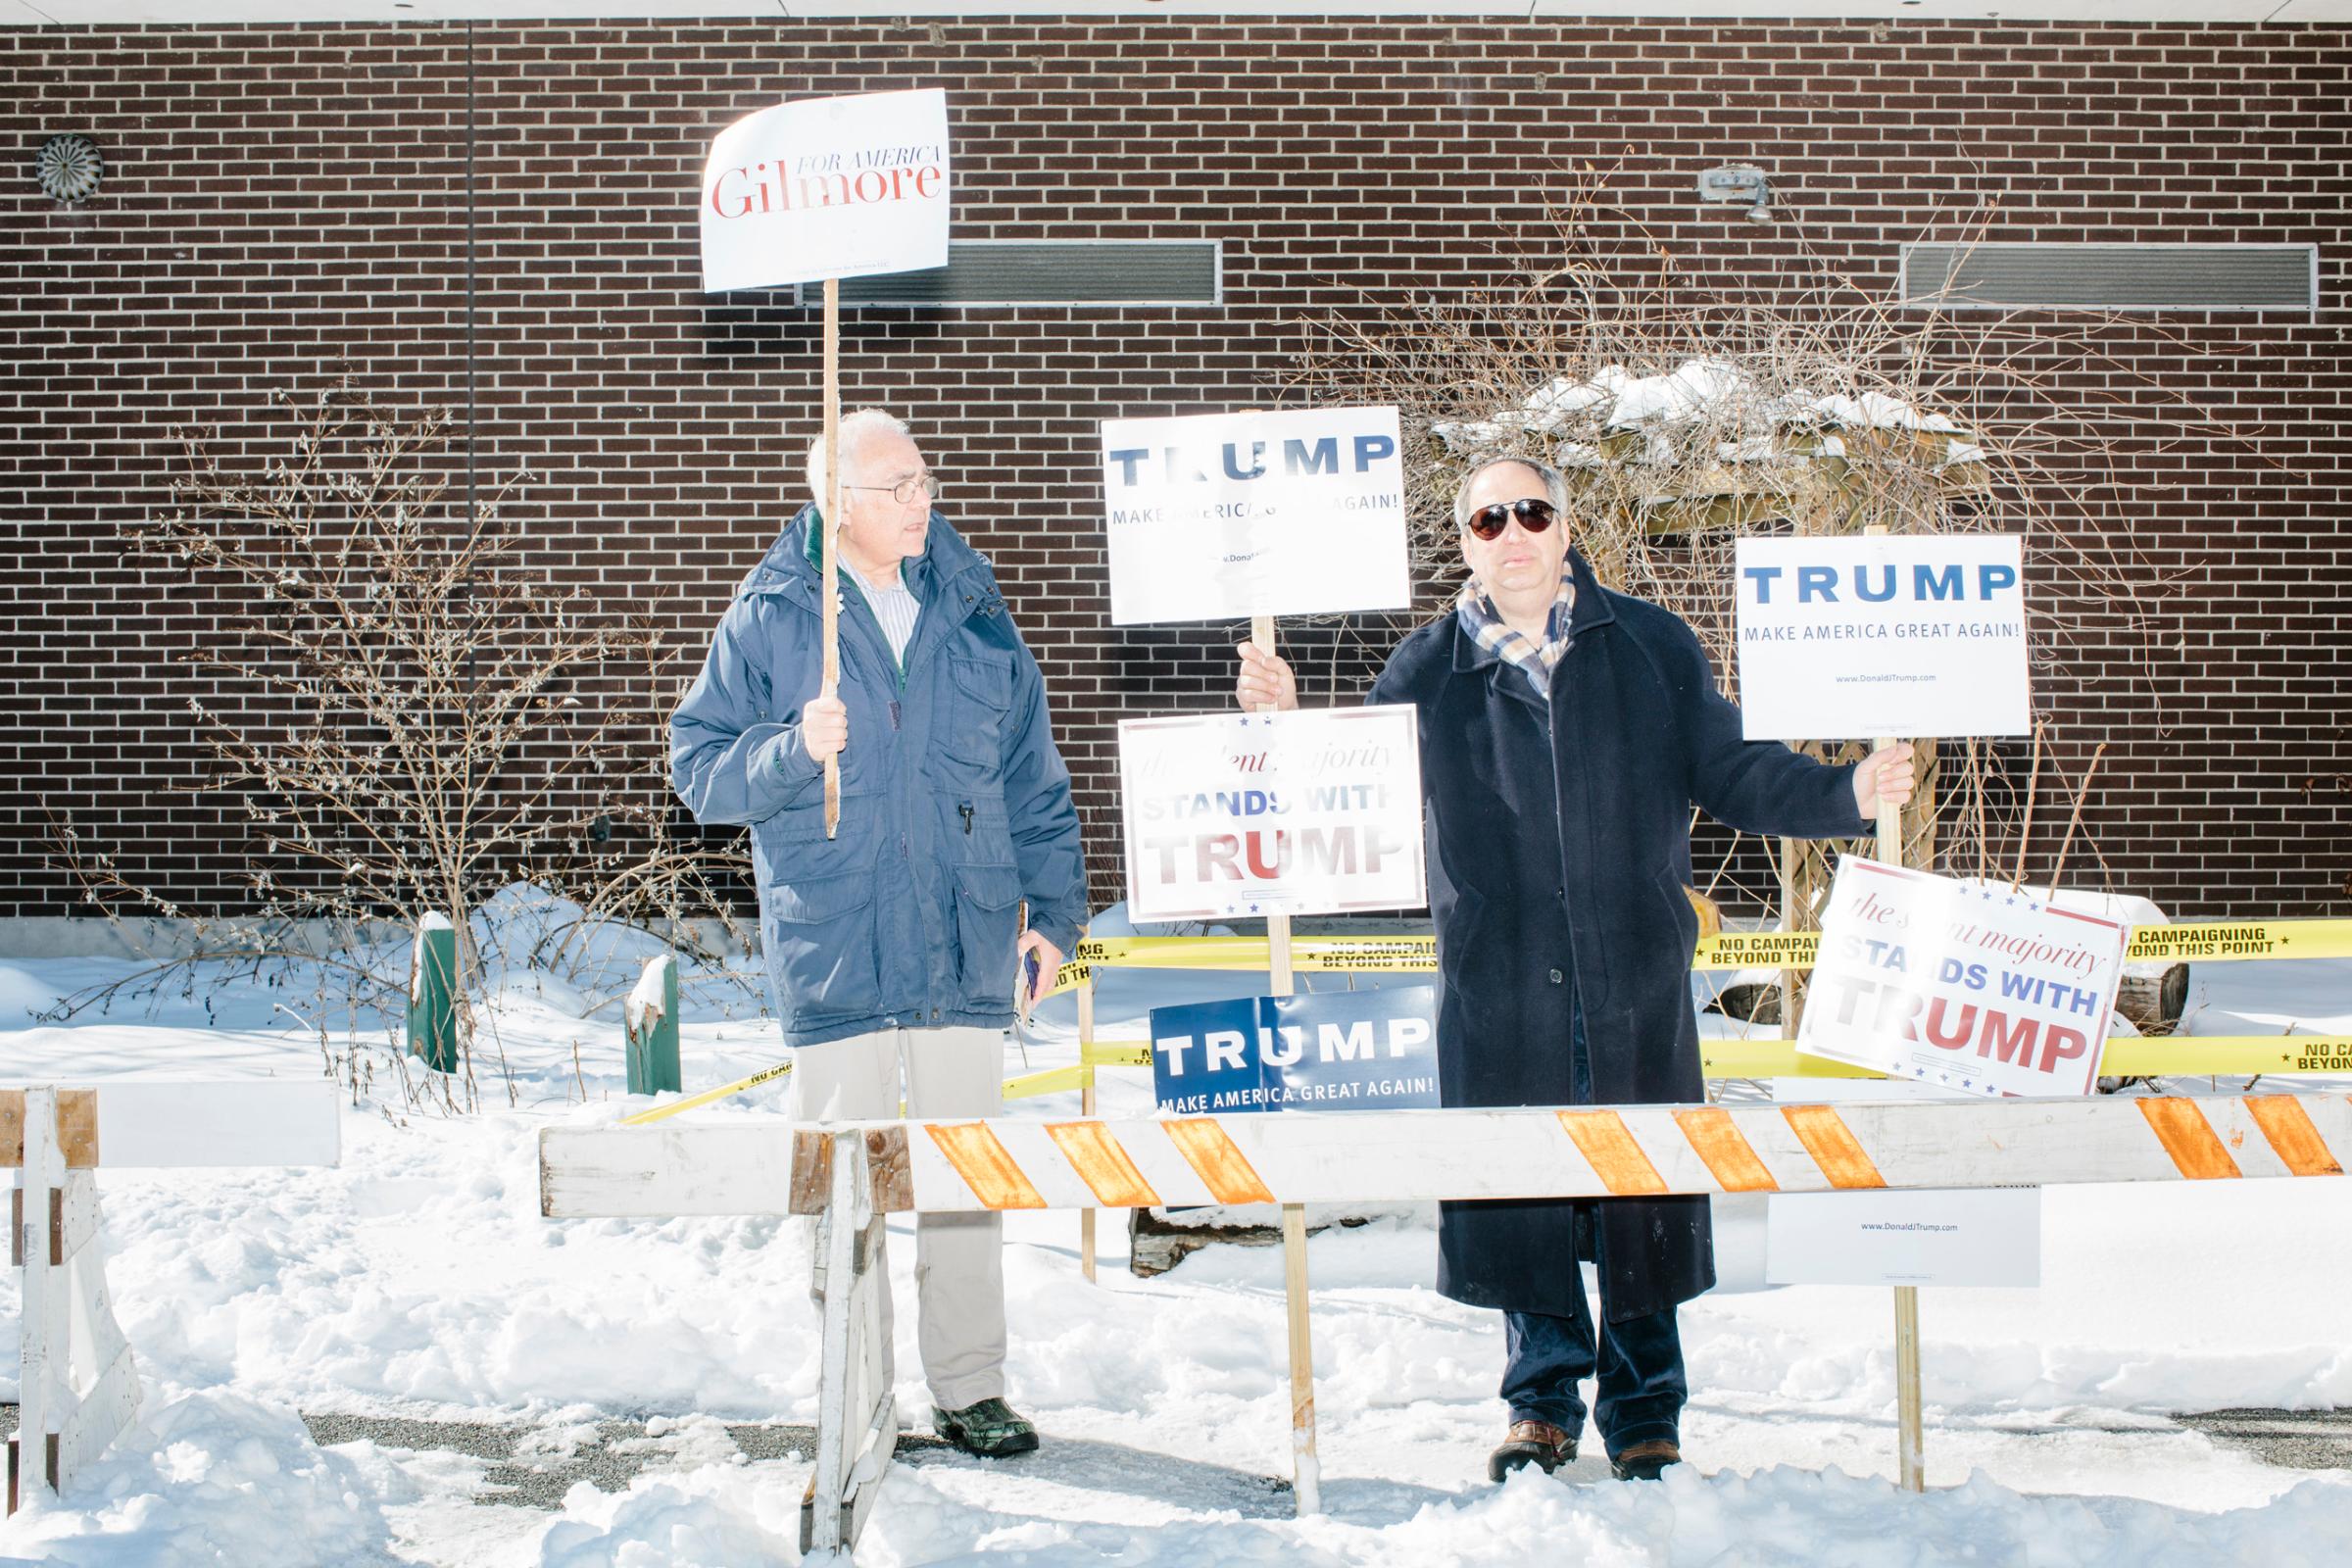 Lloyd Gatling, (left) of Suffolk, Virginia, brother-in-law of former Virginia governor and Republican presidential candidate Jim Gilmore holds campaign signs for the candidate outside the polling location for Manchester Ward 2 at Hillside Middle School in Manchester, New Hampshire, on the day of primary voting, Feb. 9, 2016. Also pictured is Jack Cohen, of Manchester, New Hampshire, a volunteer with the Trump campaign. Gilmore finished in last place among major Republican candidates still in the race with a total of 150 votes.